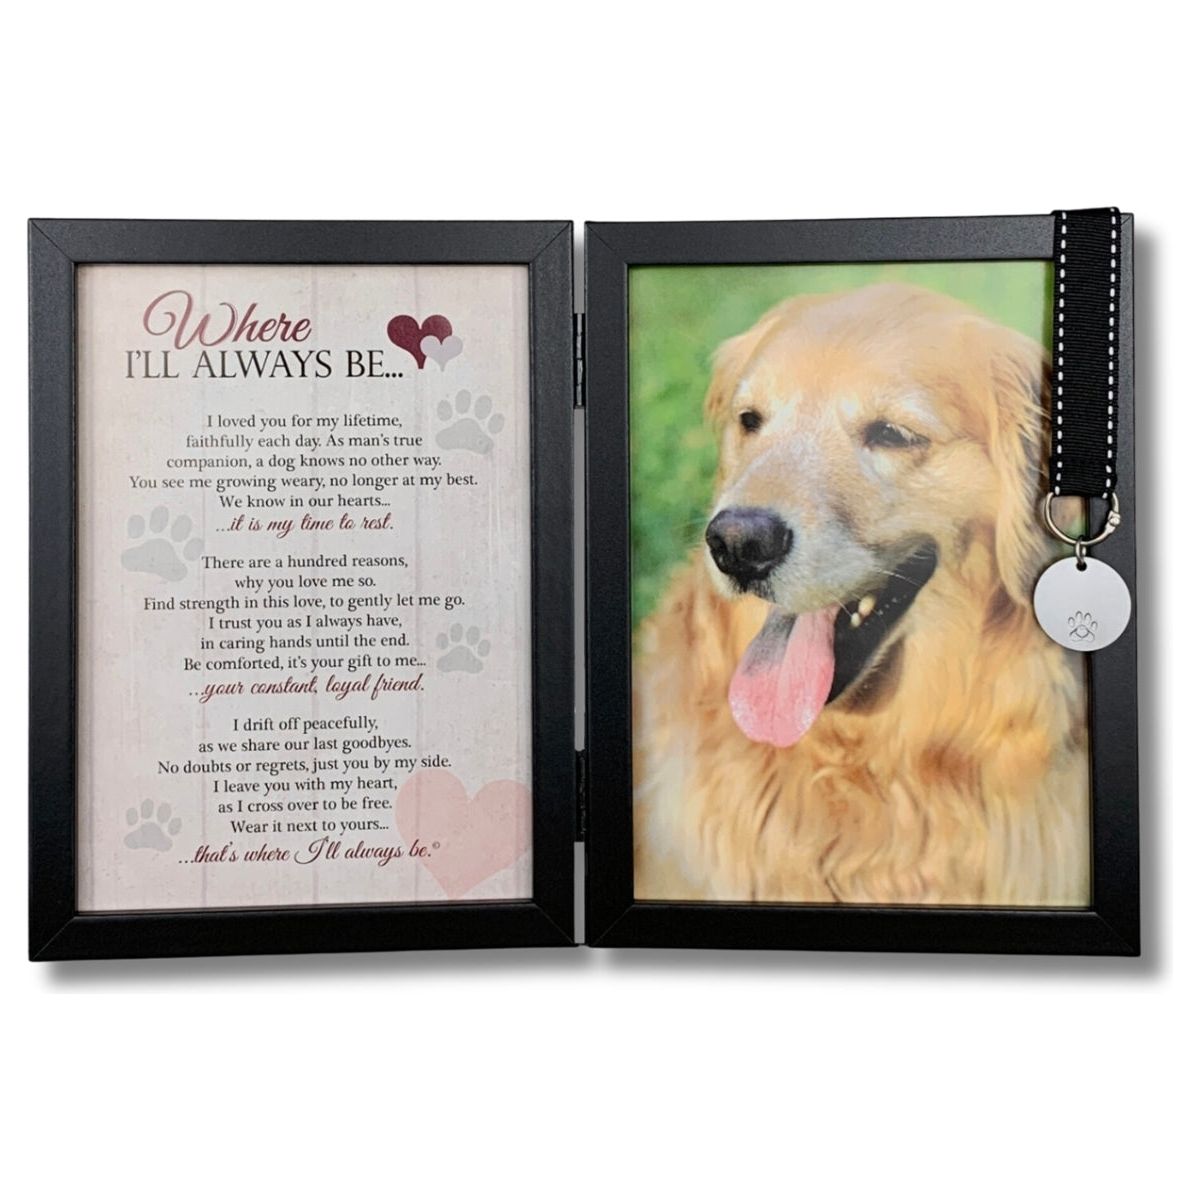 Black 5x7 double frame with a tag hanging from a ribbon. Left side of frame contains &quot;Where I&#39;ll Always Be&quot; poem. Space for a 5x7 photo of dog on right side.